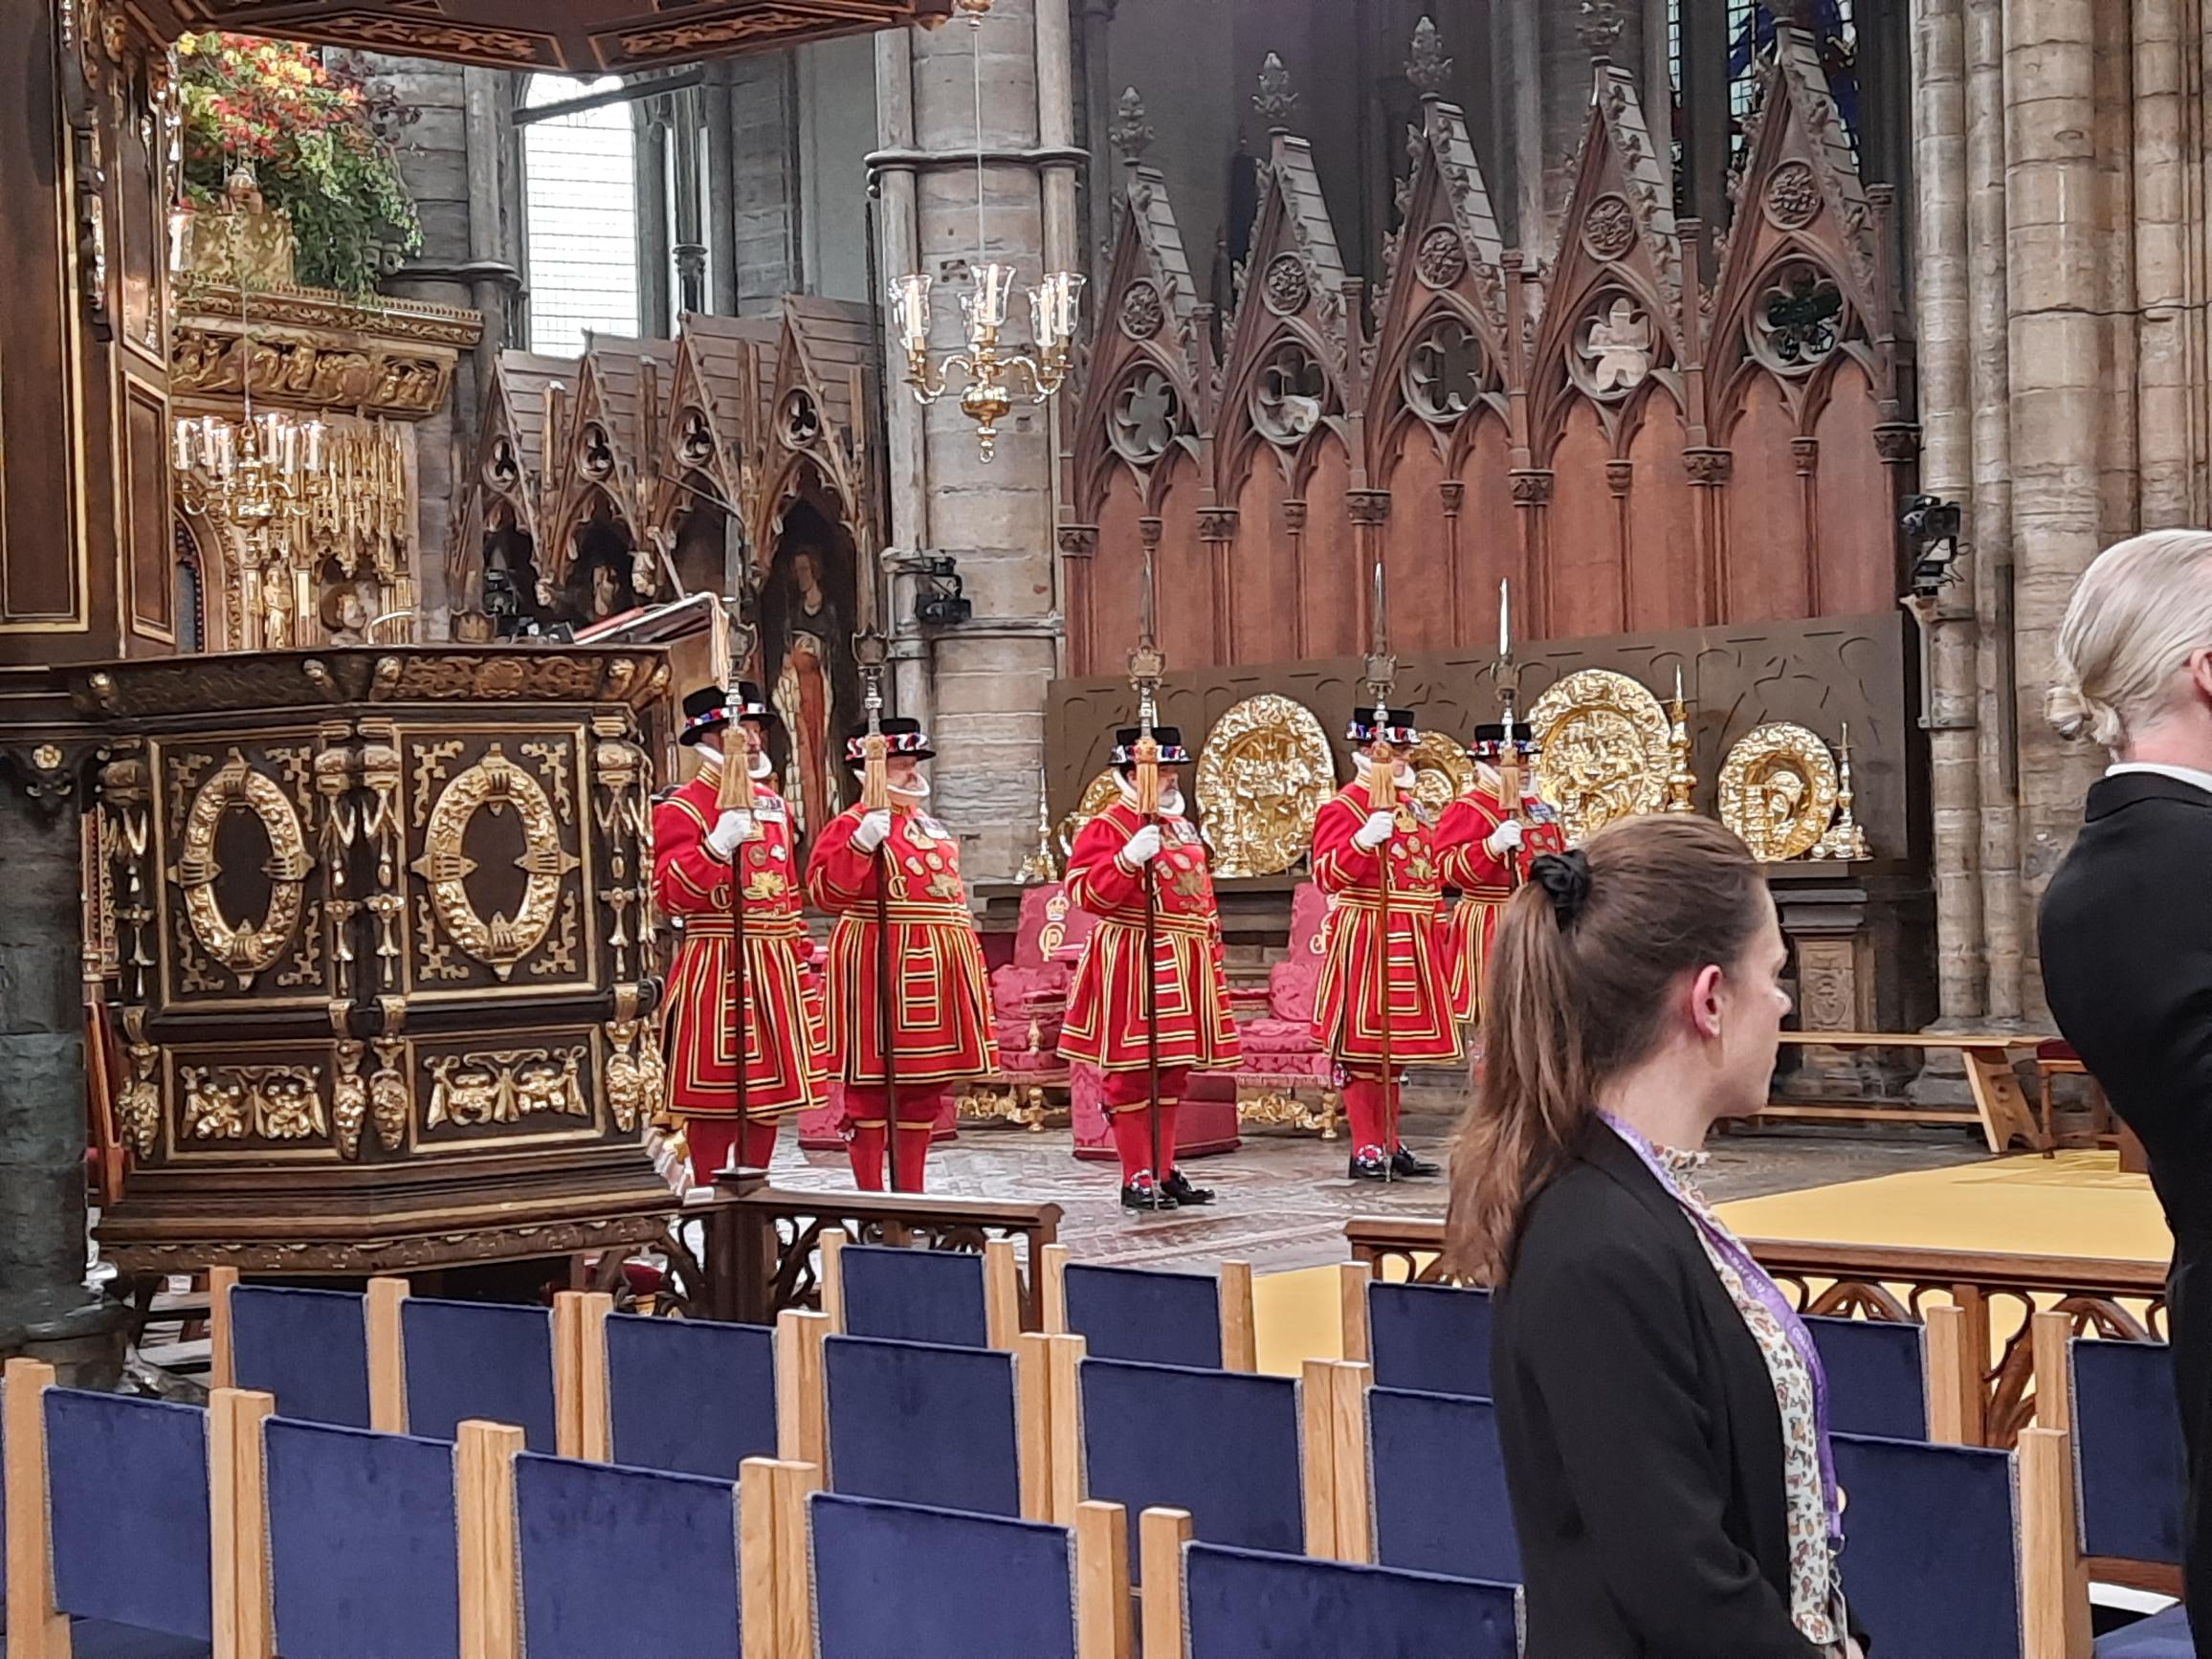 A picture of five yeoman, dressed in red uniforms holding tall spears, guarding a section of Westminster Abbey that was to be the main section used for the Coronation of King Charles III